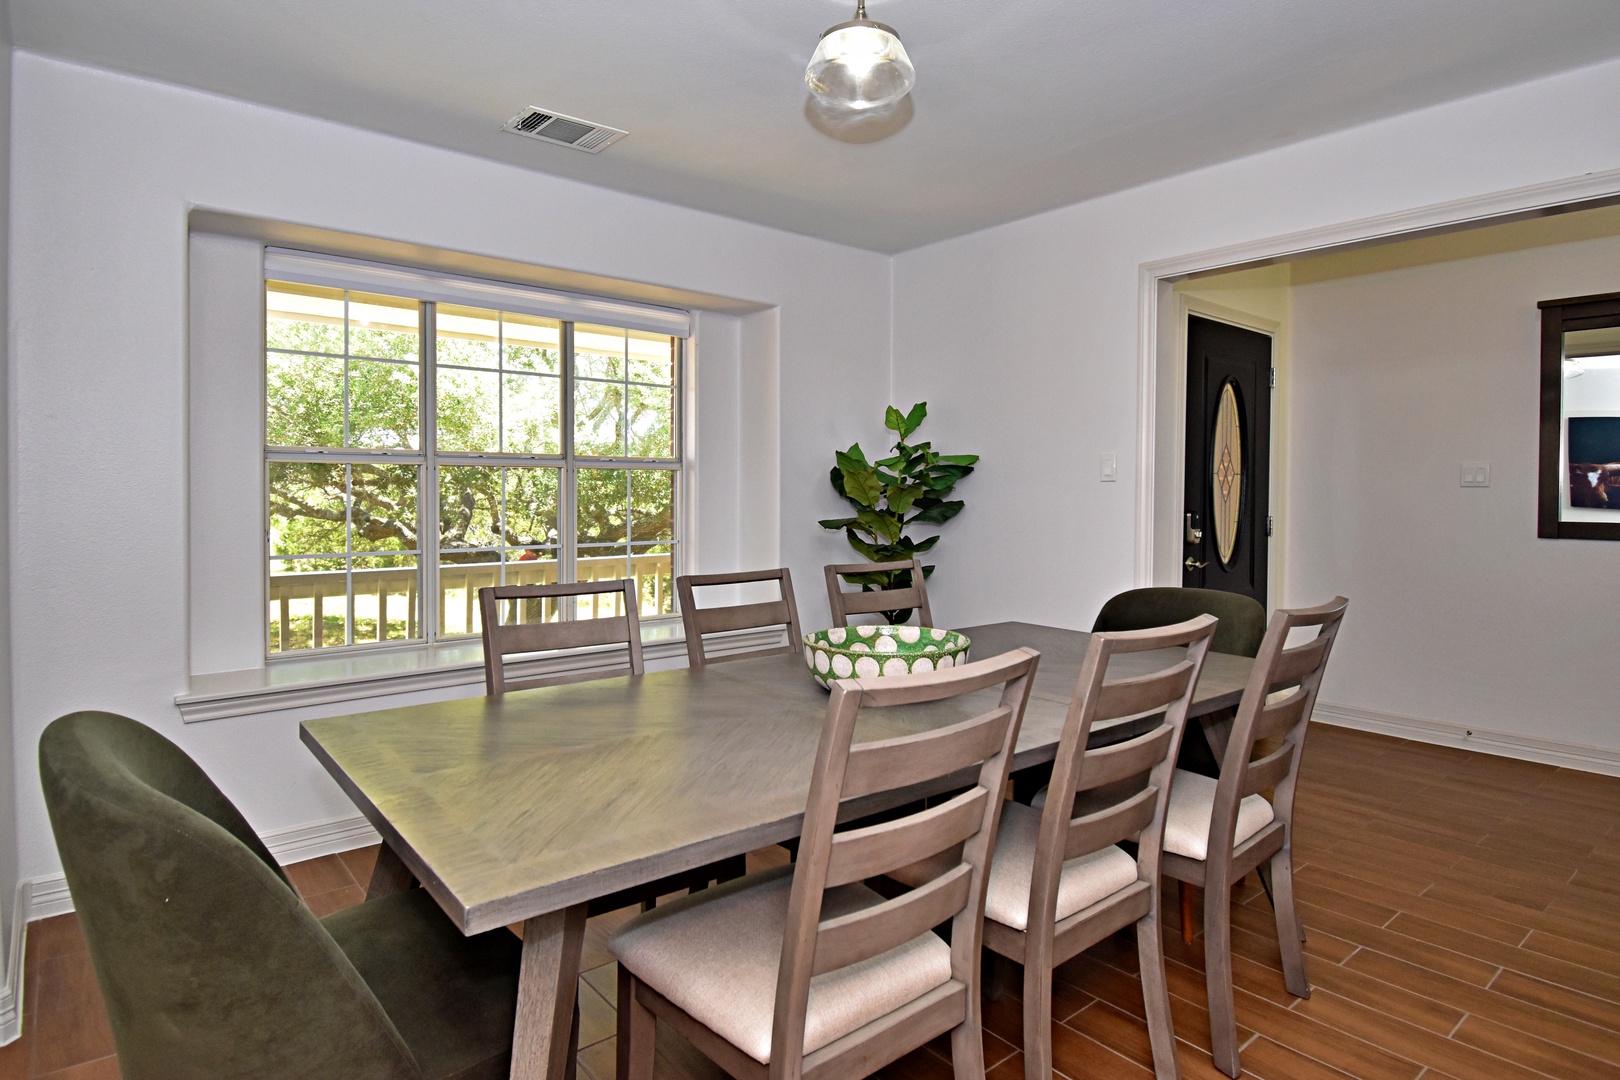 Gather for elegant meals together at the dining table, with seating for 8